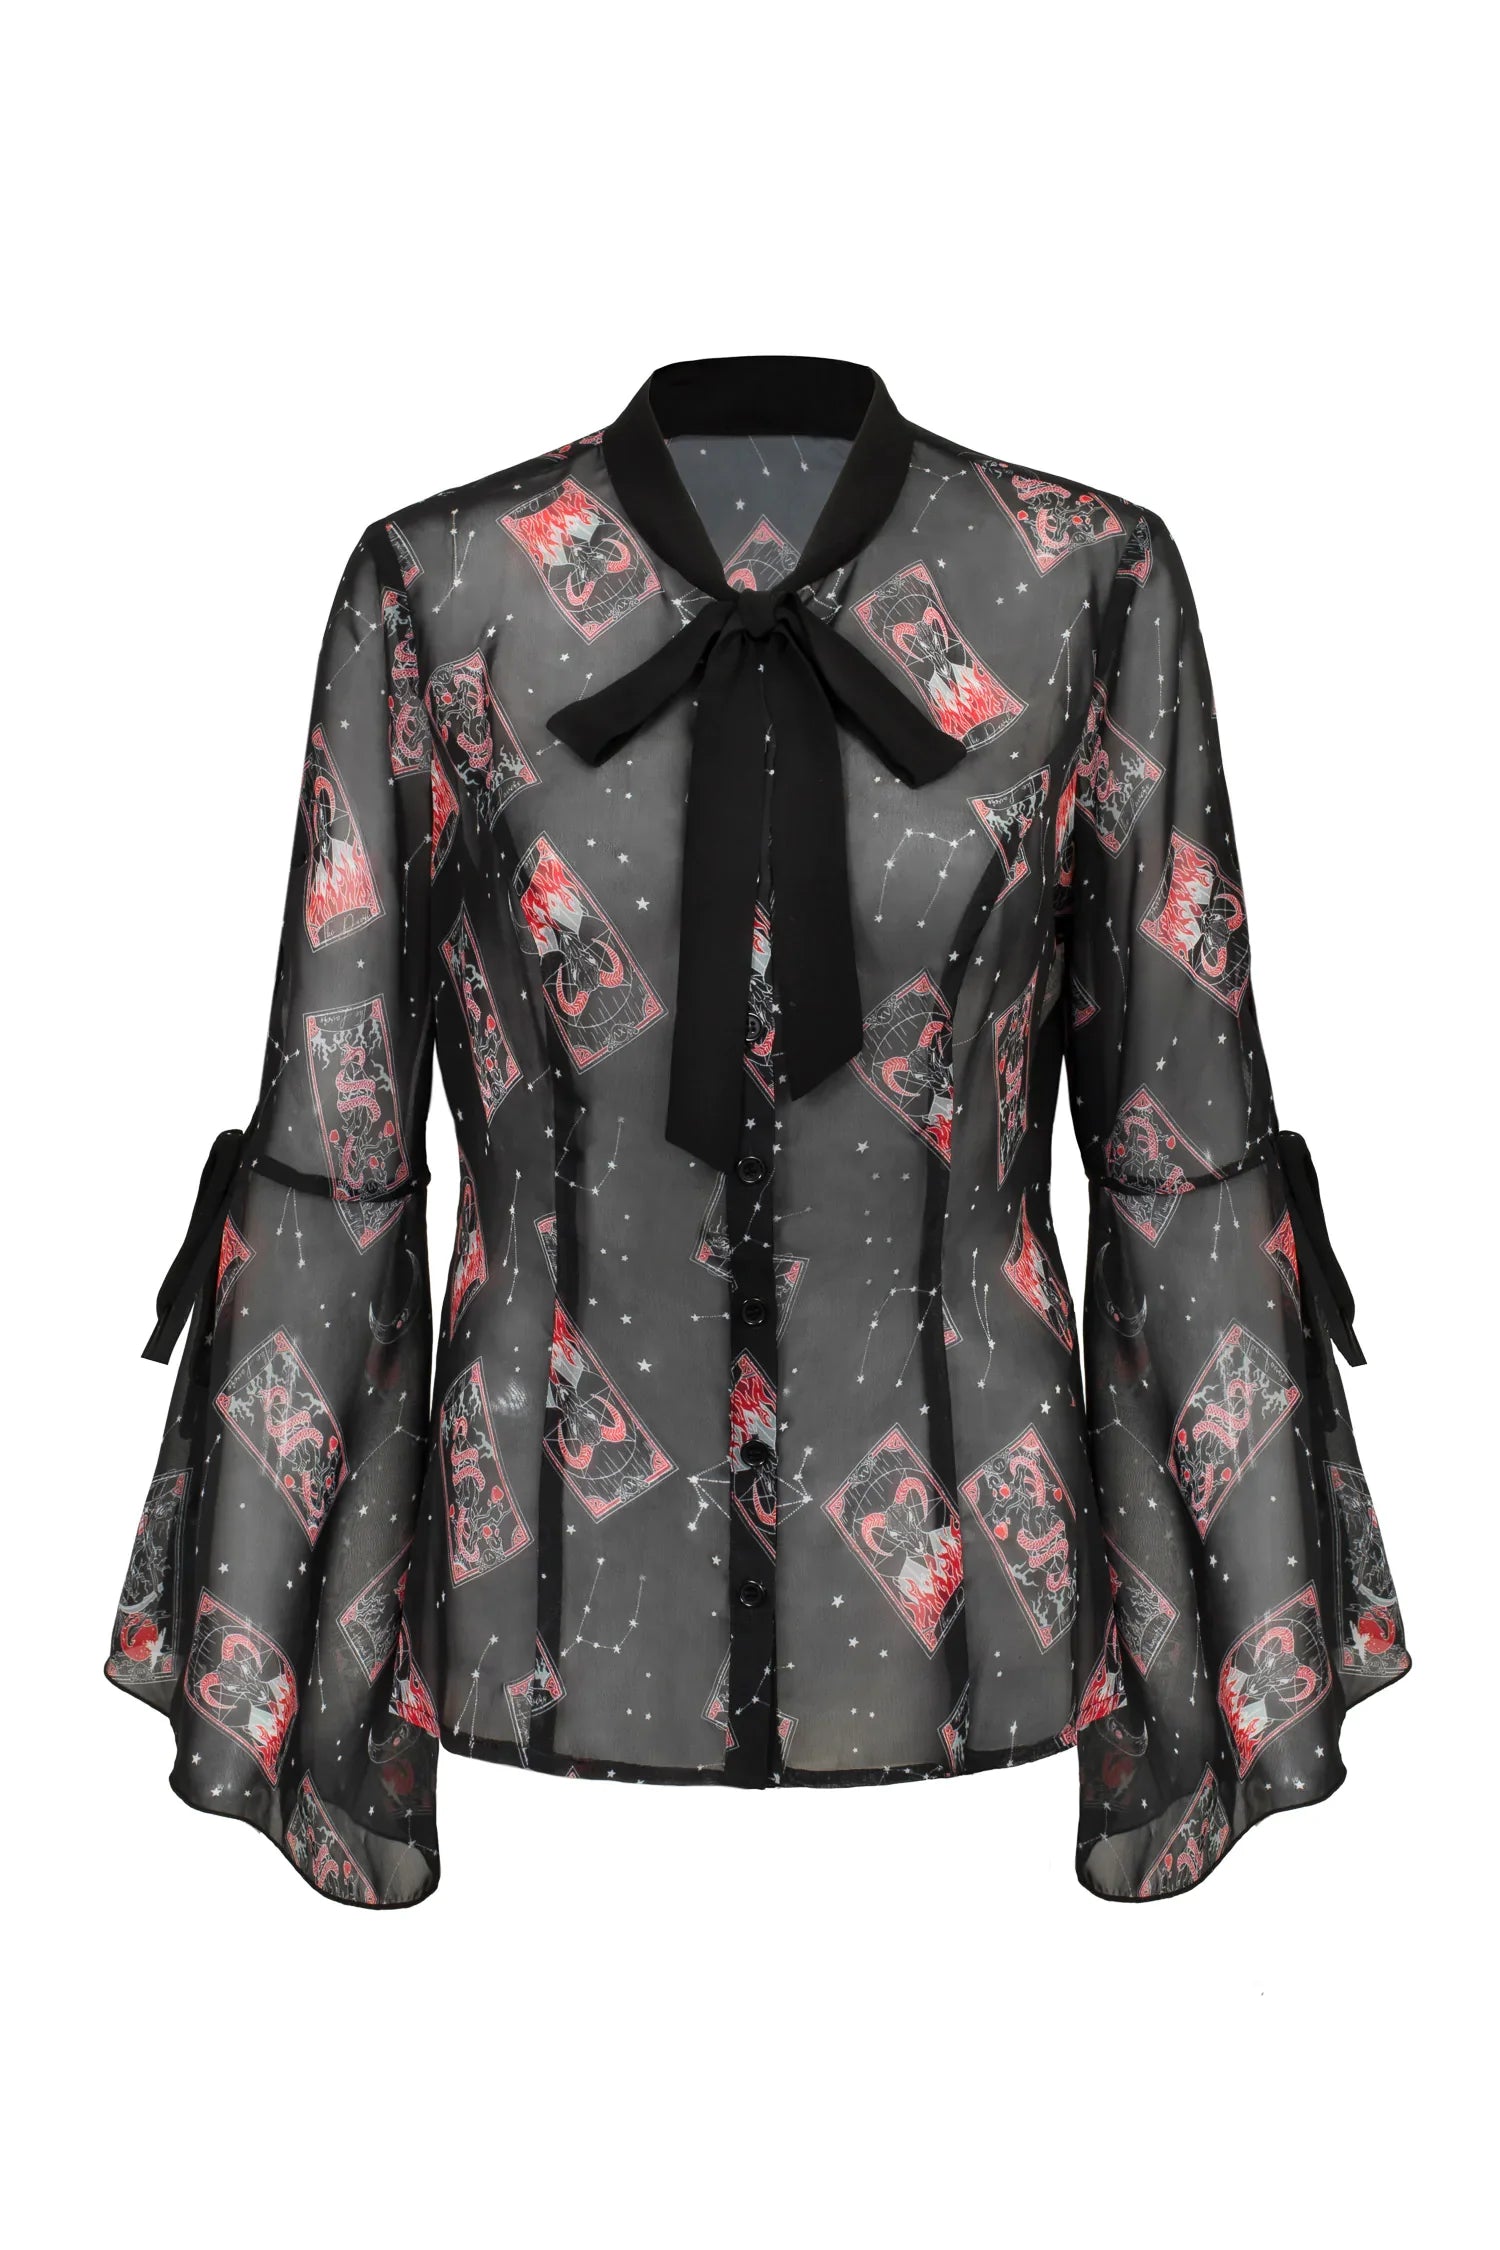 Duality blouse